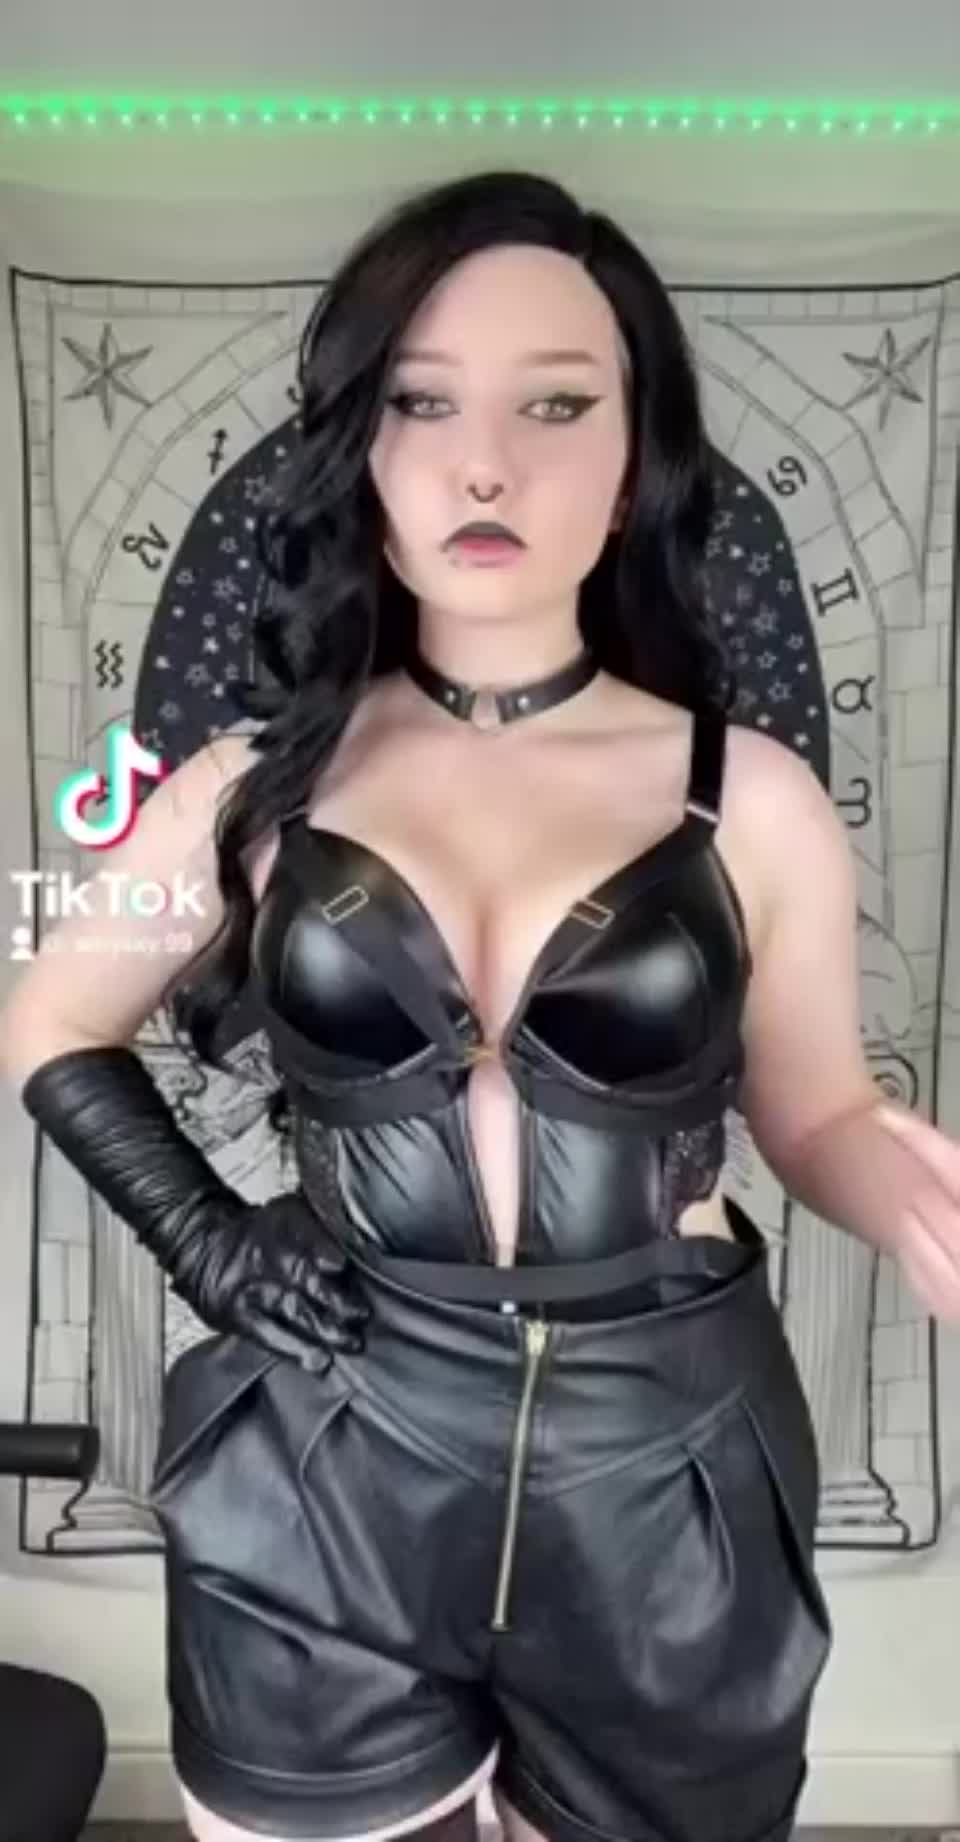 Chimeracostumes boobs